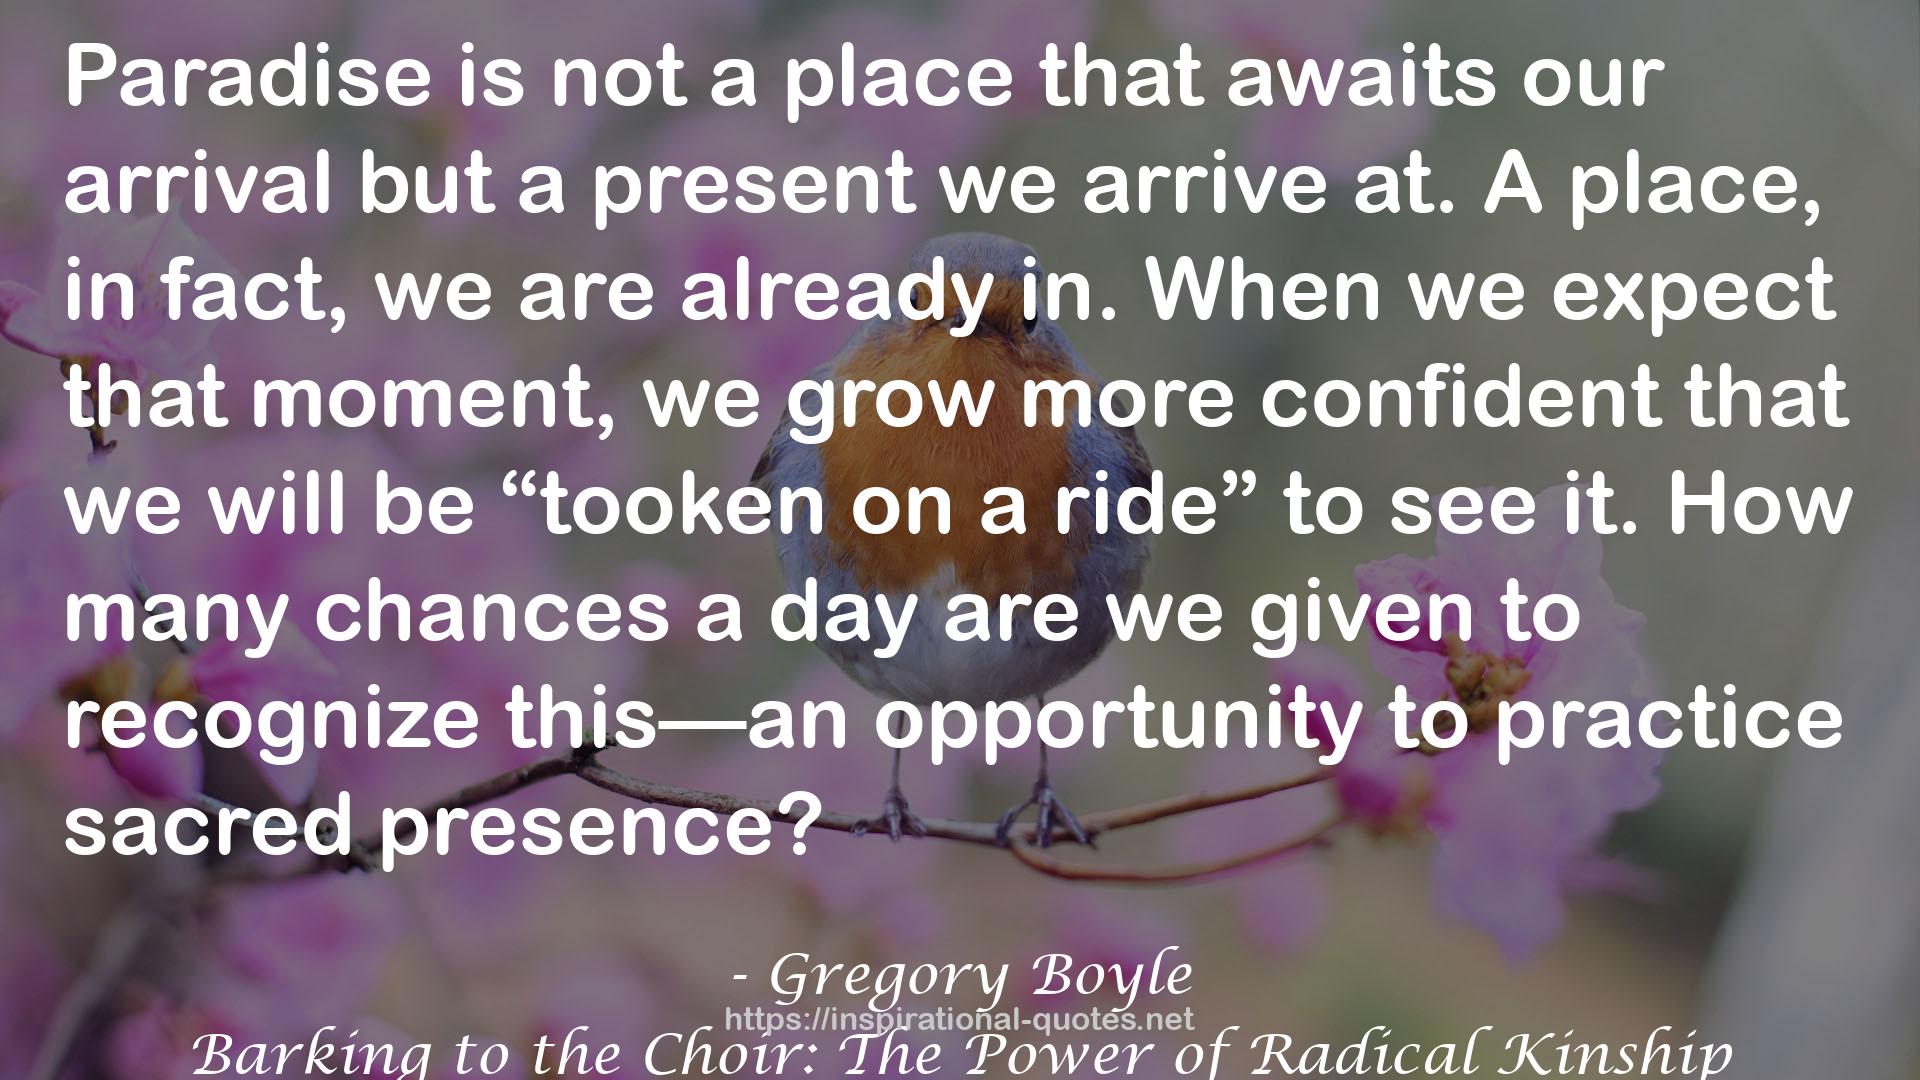 Gregory Boyle QUOTES